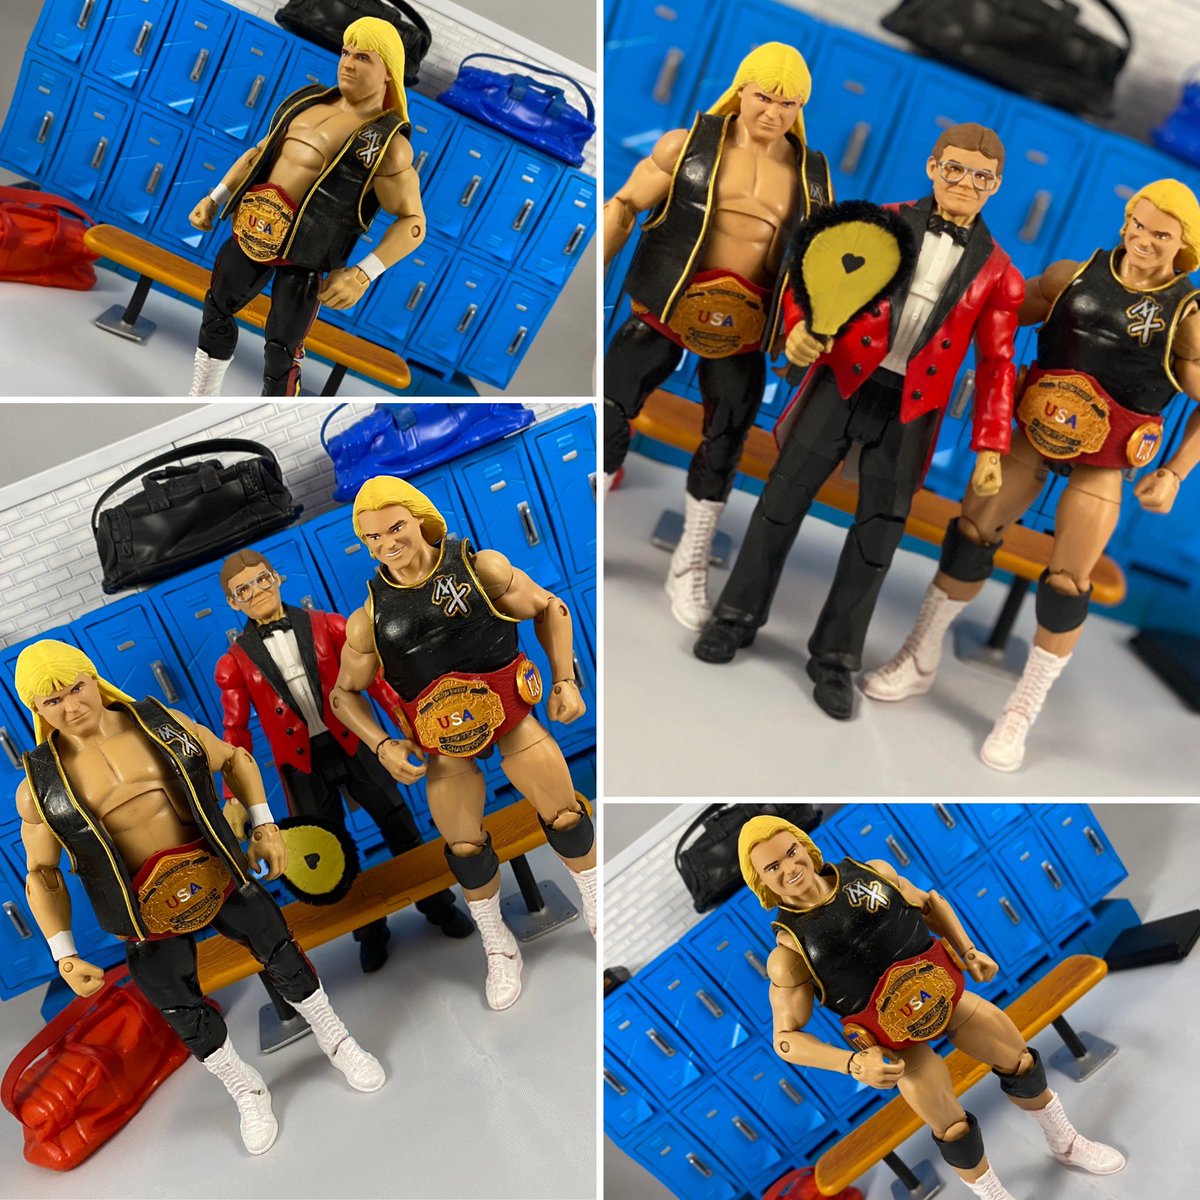 The NEW United States Tag Team Champions: “Beautiful” Bobby and “Sweet” Stan, the Midnight Express, alongside their manager, James E. Cornette! Heads sculpted by The Great Tom Veg!